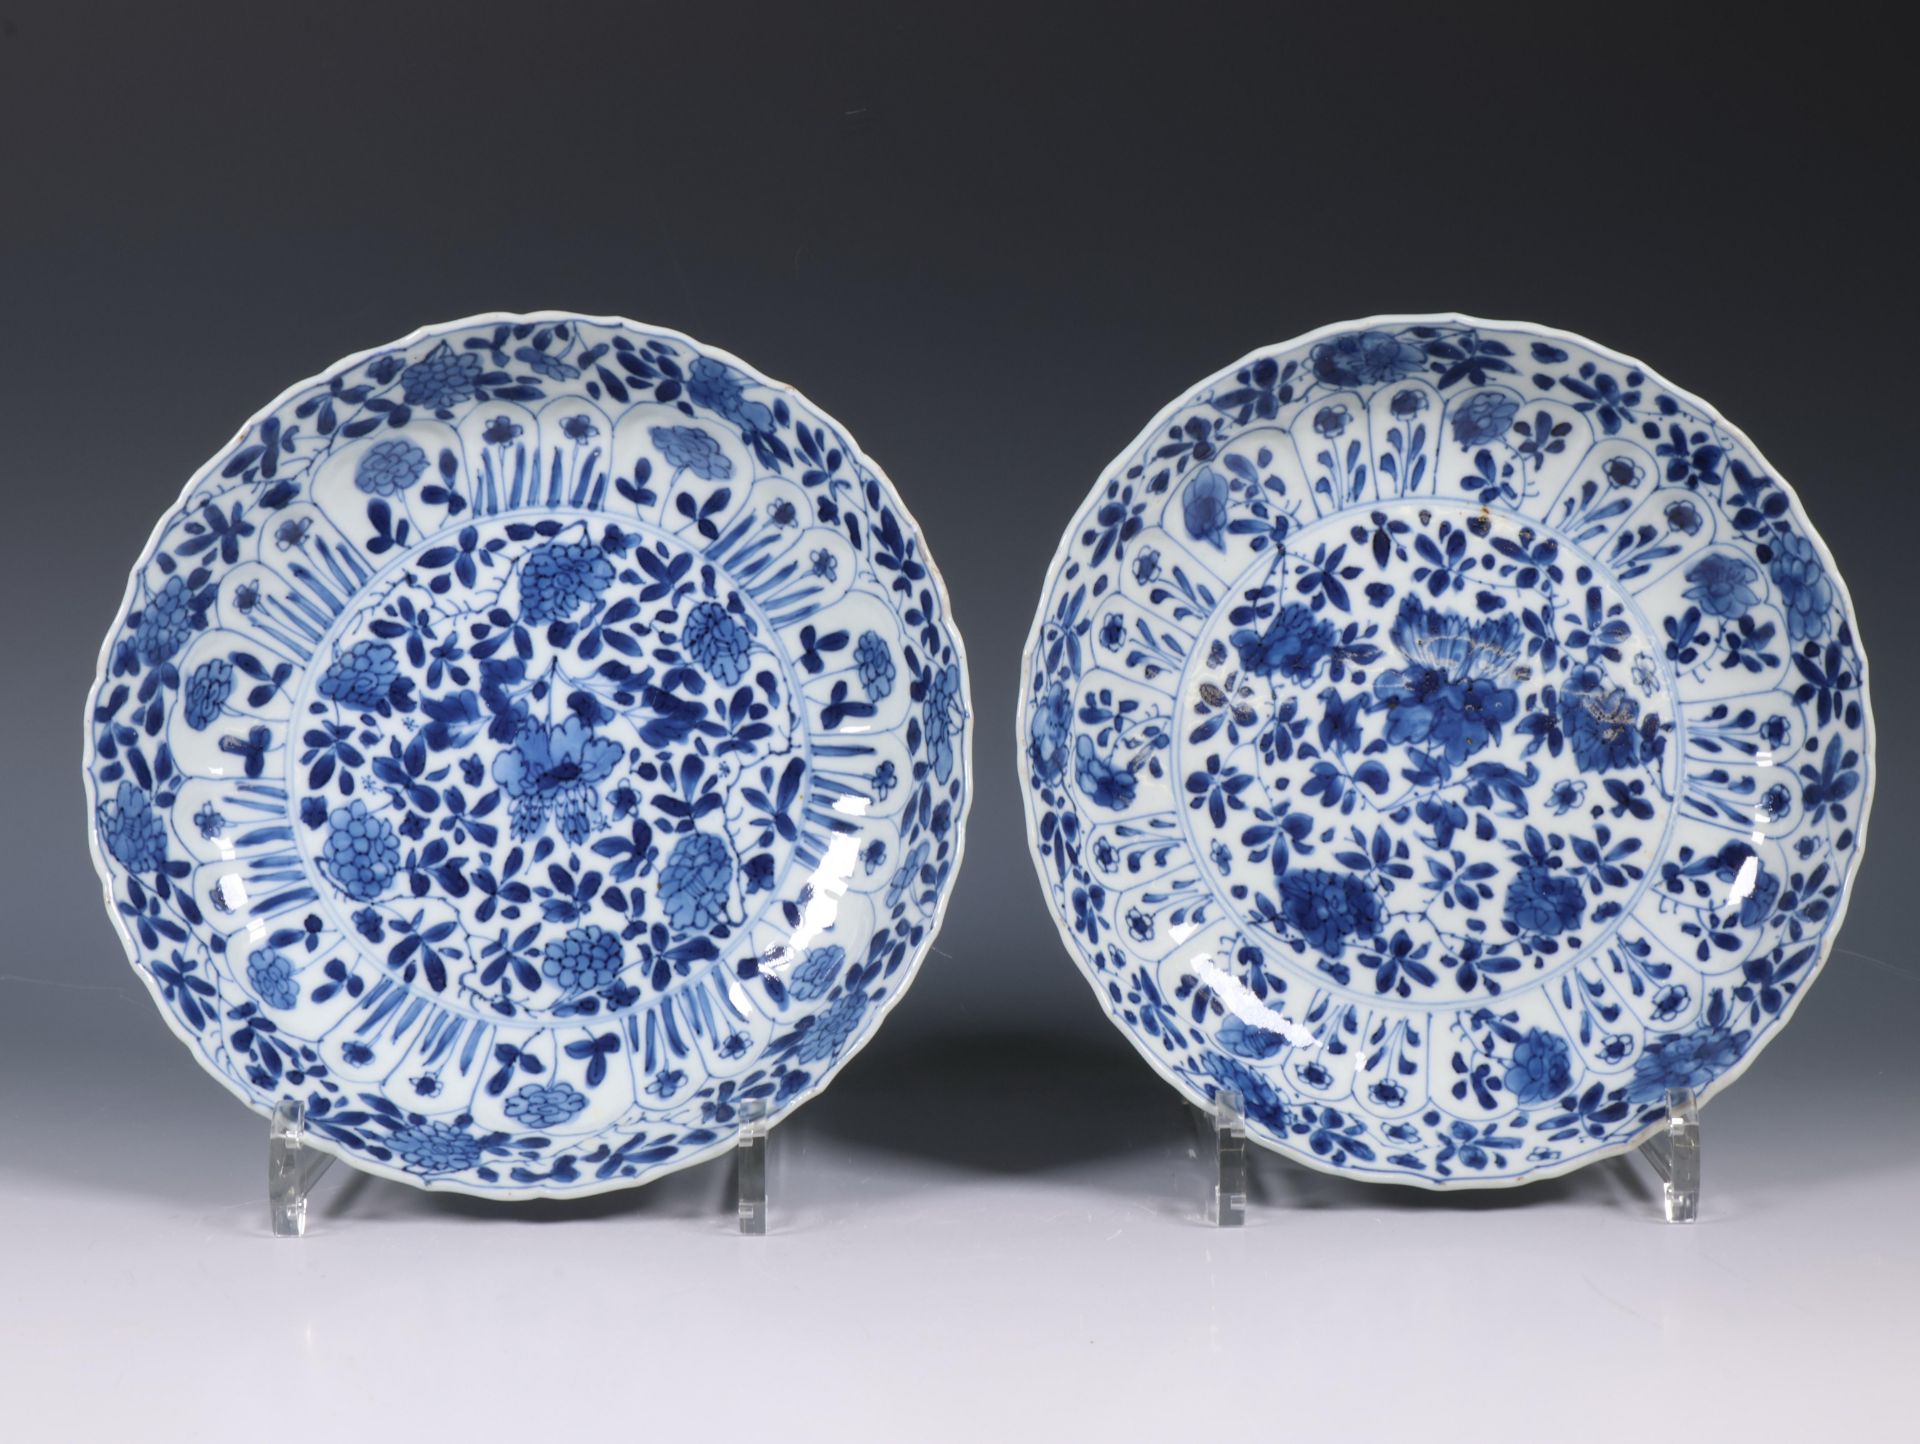 China, two pairs of blue and white plates, Kangxi period (1662-1722) and 18th century, - Image 3 of 4